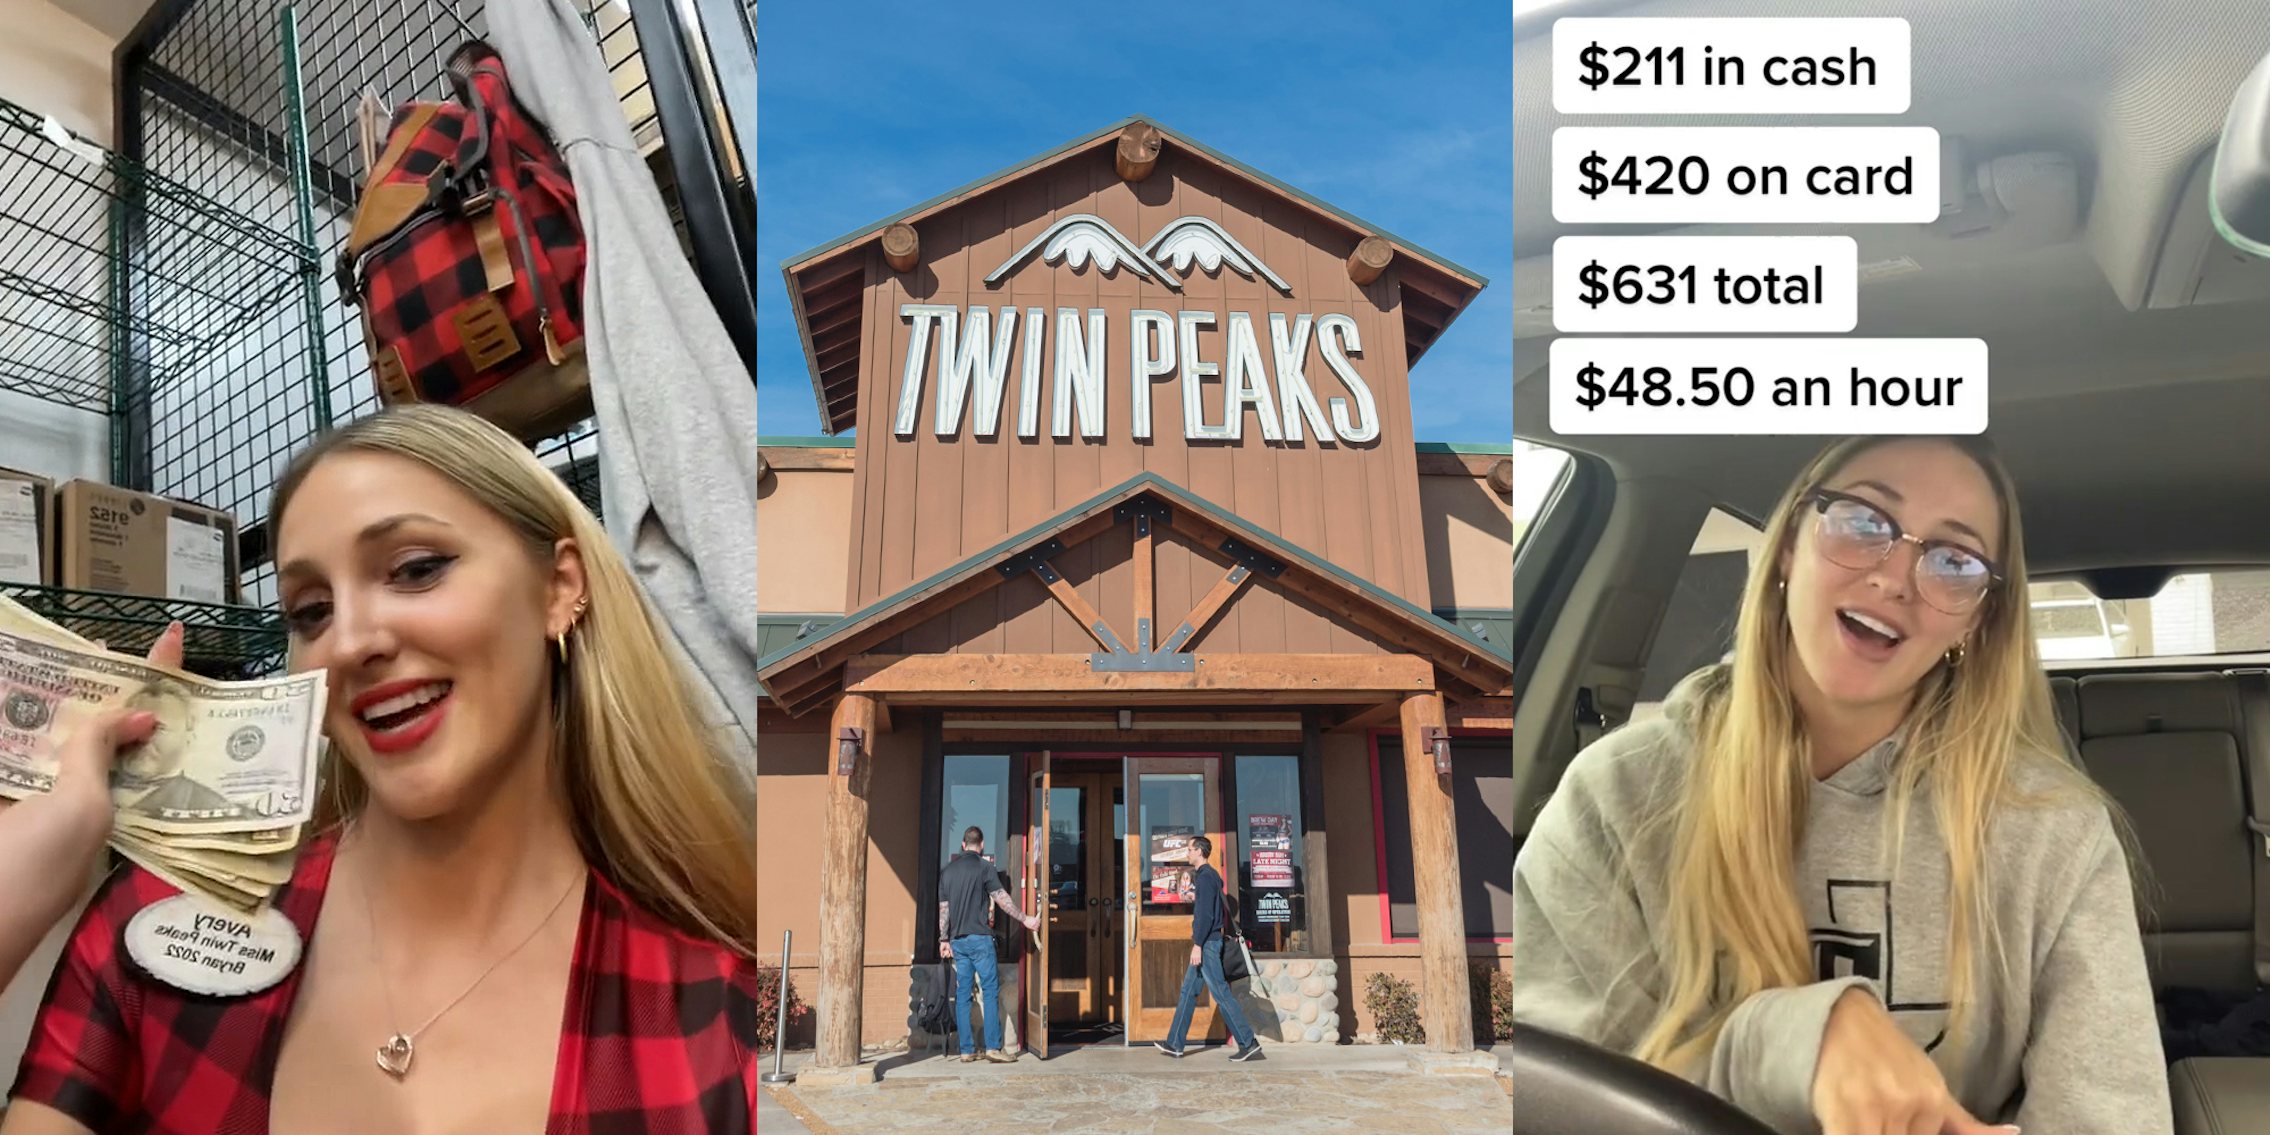 Twin Peaks employee speaking holding cash (l) Twin Peaks building entrance with sign and blue sky (c) Twin Peaks employee speaking in car with caption '$211 in cash $420 on card $631 total $48.50 an hour' (r)